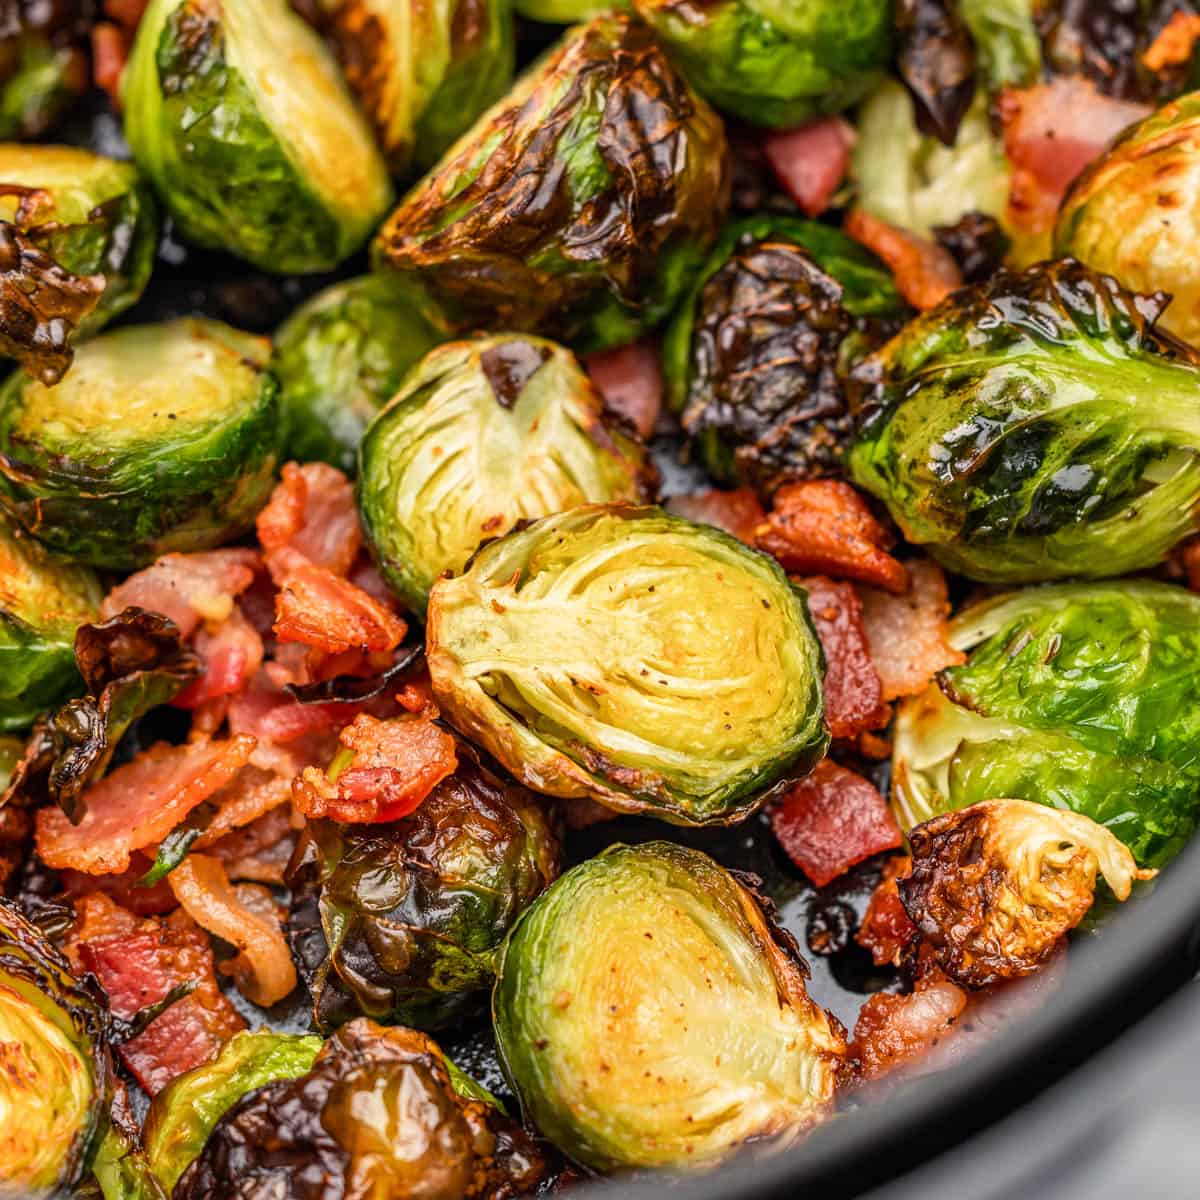 Air fryer brussel sprouts with bacon.